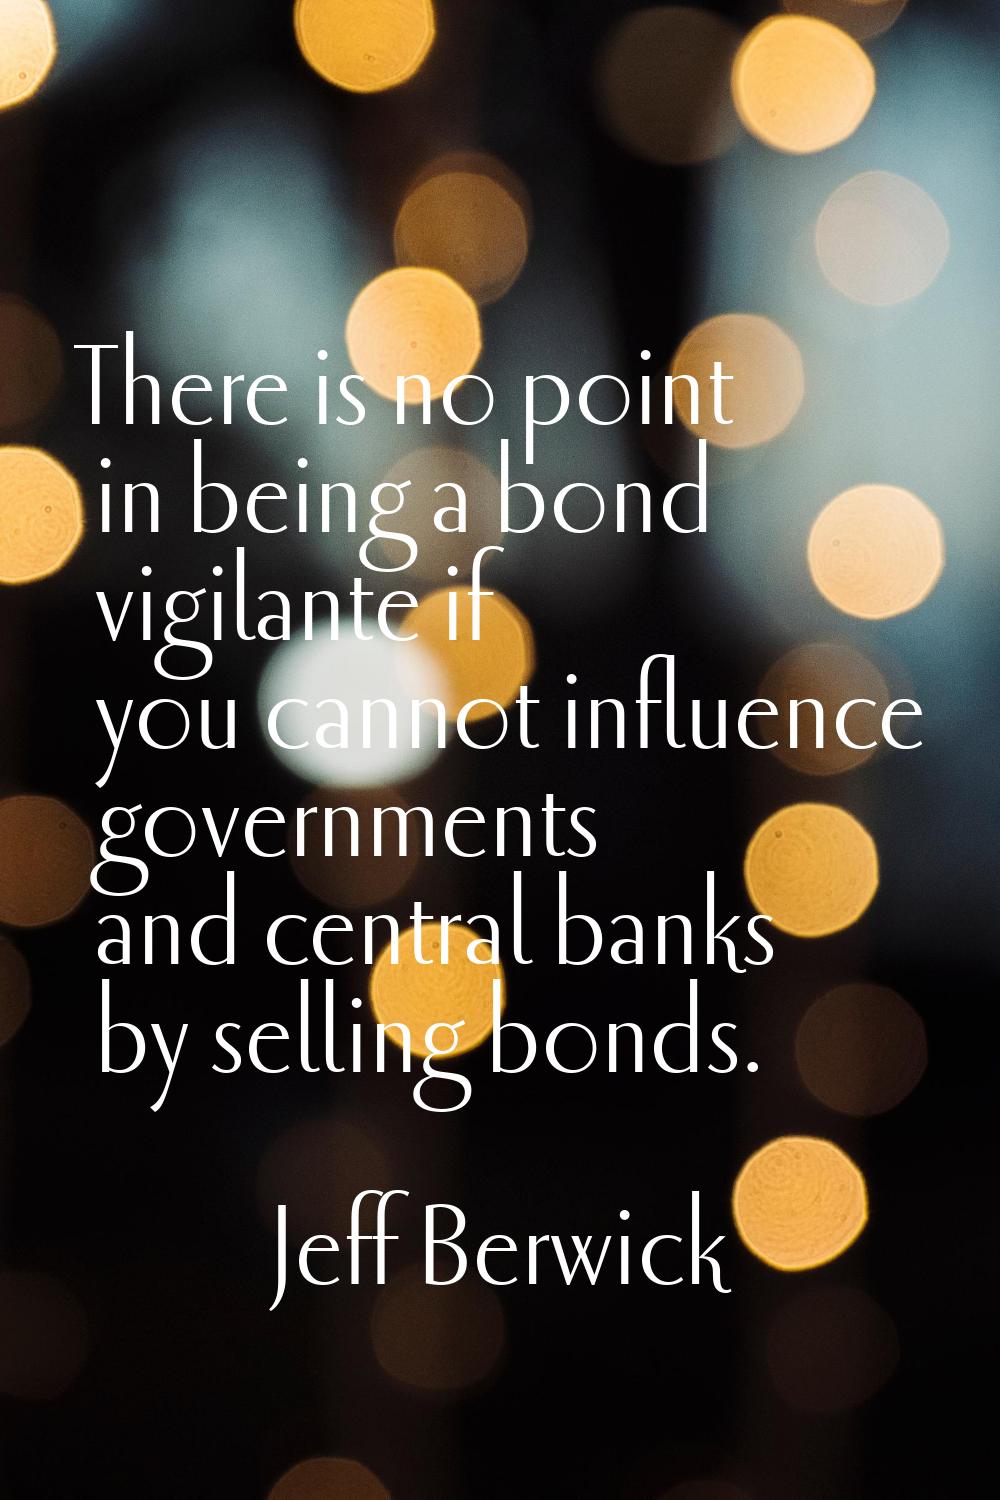 There is no point in being a bond vigilante if you cannot influence governments and central banks b